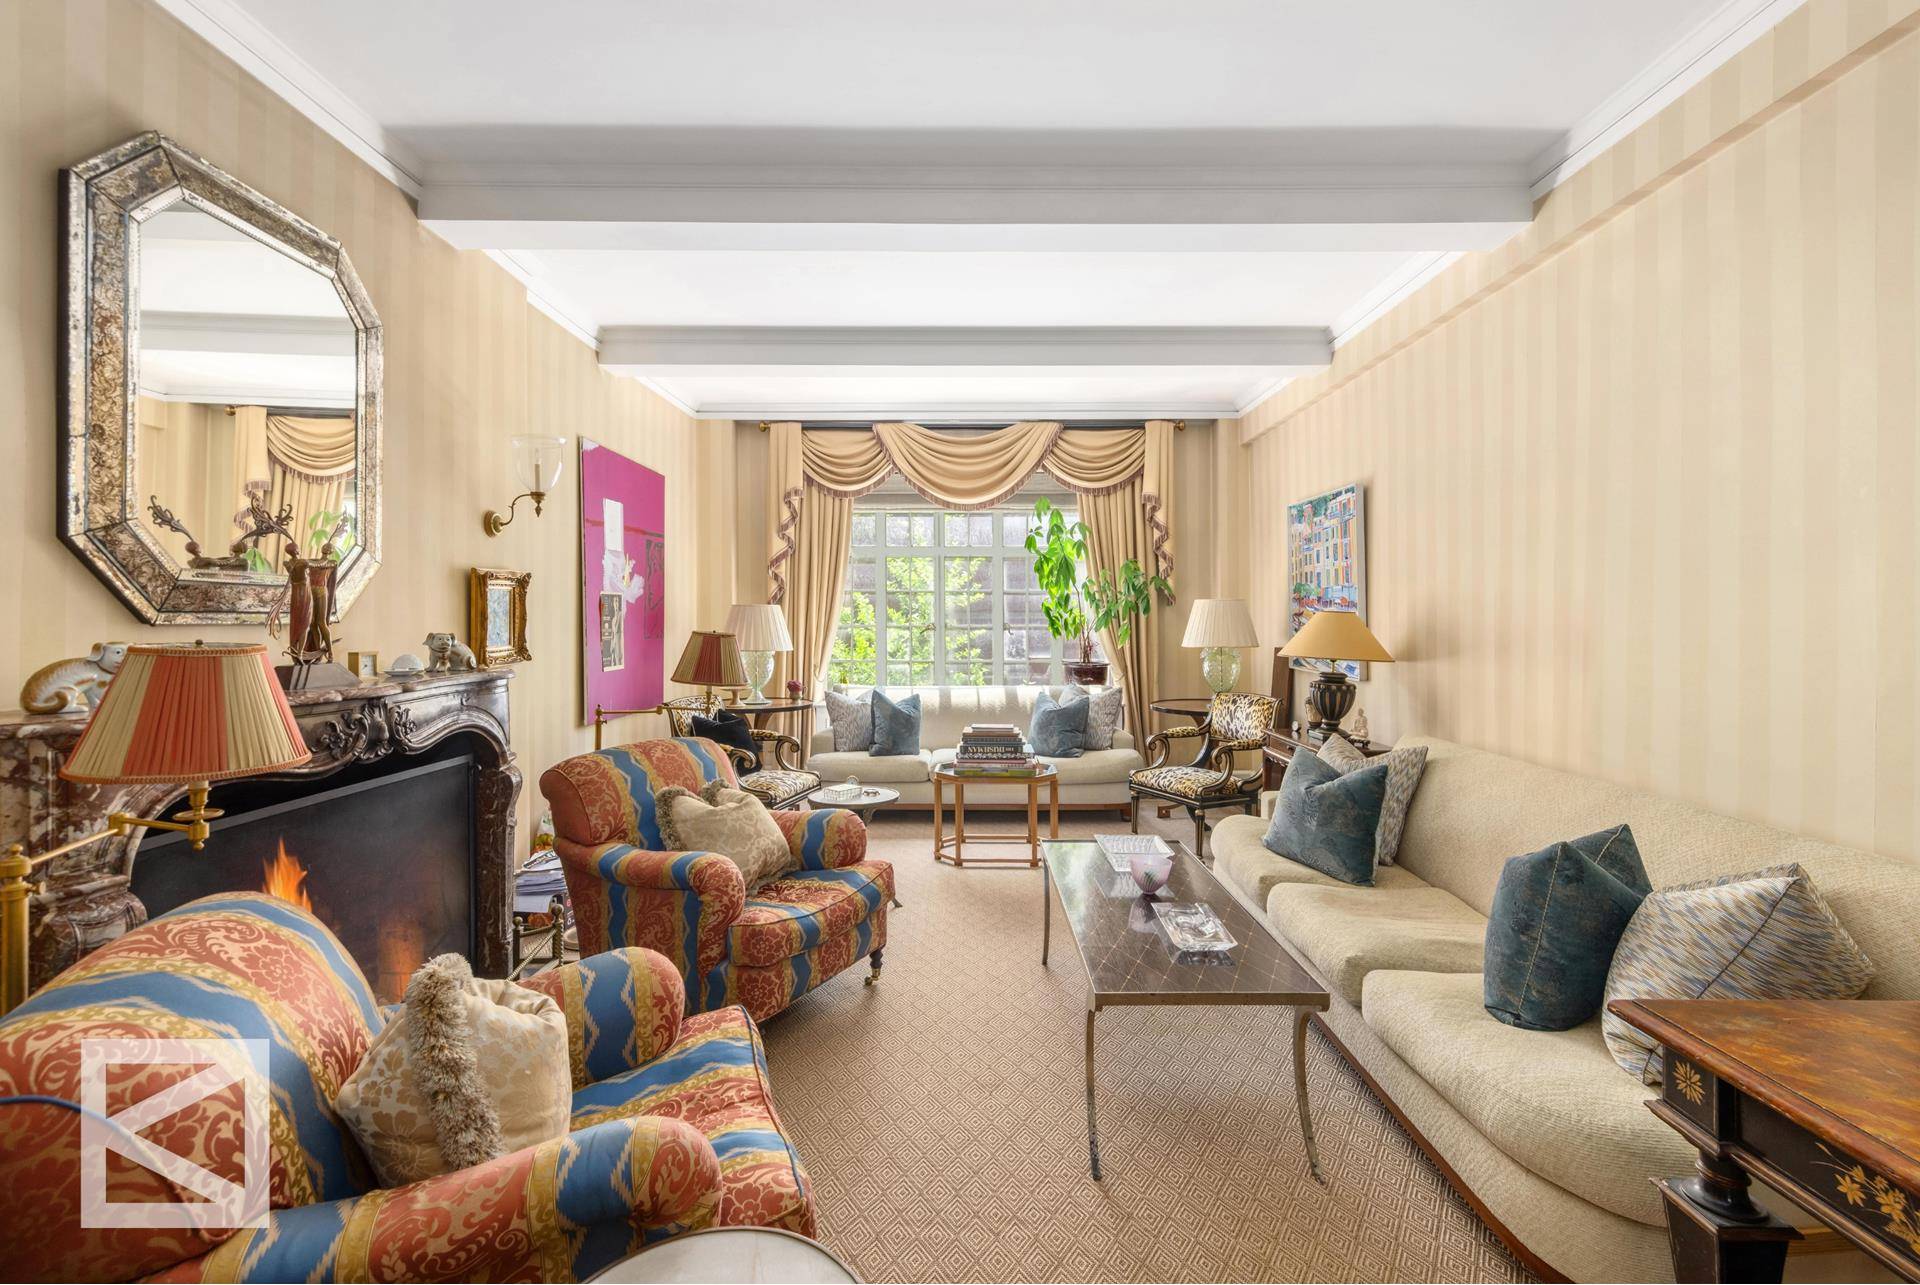 Experience the epitome of Upper East Side luxury living in this captivating duplex residence boasting 5 bedrooms and 5 bathrooms.